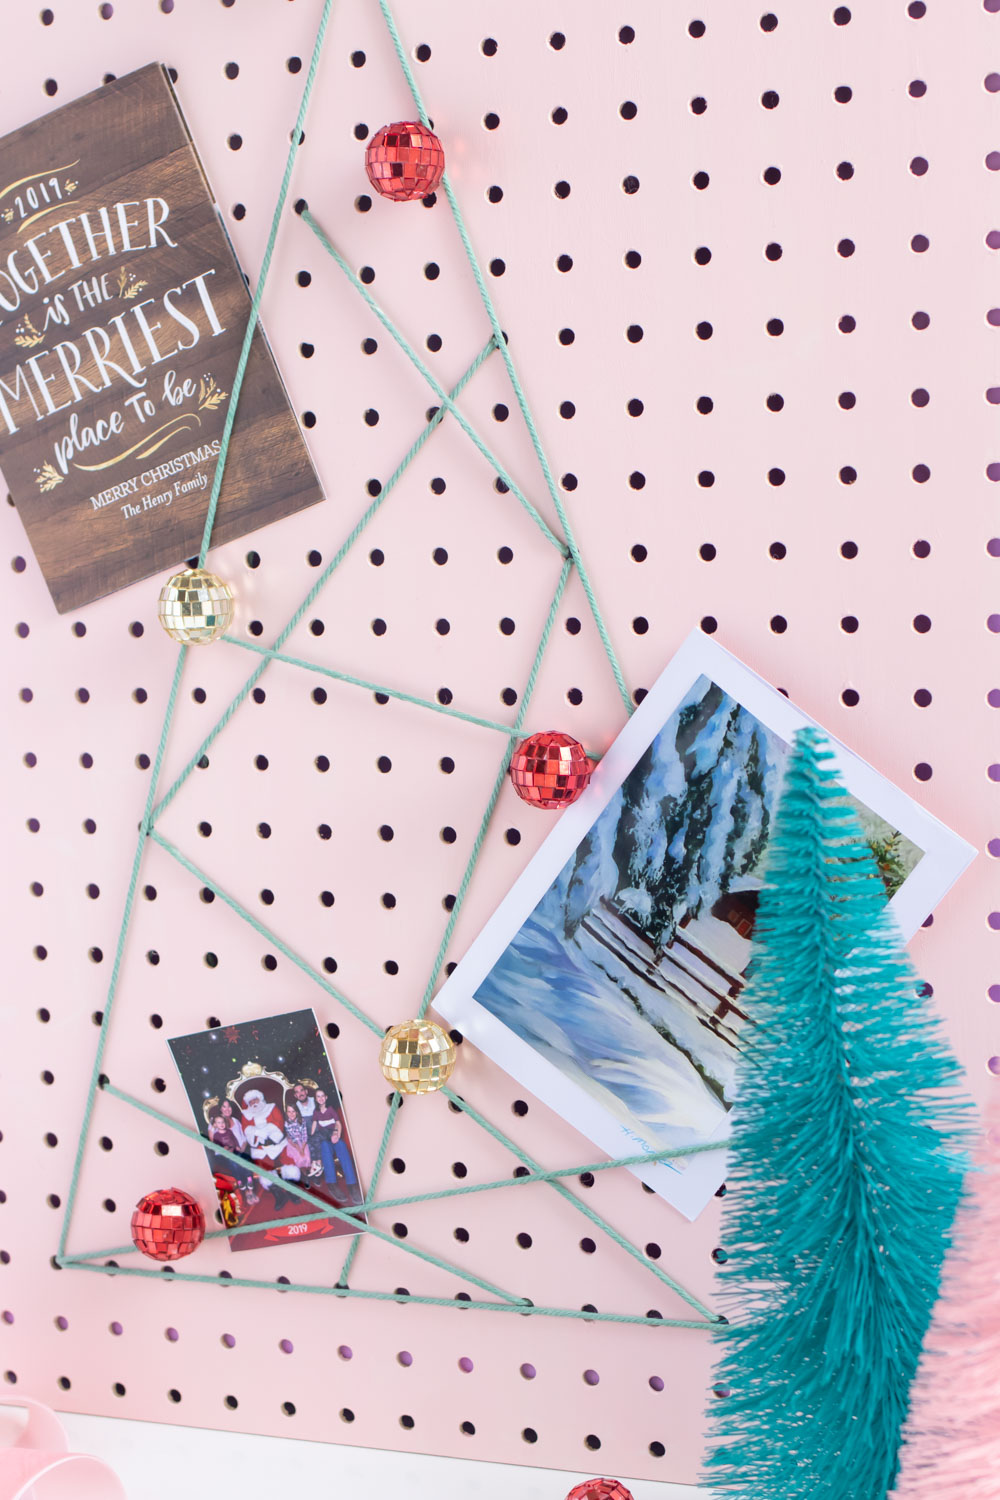 DIY Holiday Pegboard Card Holder // Turn a slab of pegboard into a fun Christmas tree card display inspired by string art! Display your holiday cards in a unique way with this DIY Christmas decor idea #christmasdiy #christmascard #christmasdecor #christmasstorage #pegboard #papercrafts #stringart #holidaystorage #cardstorage